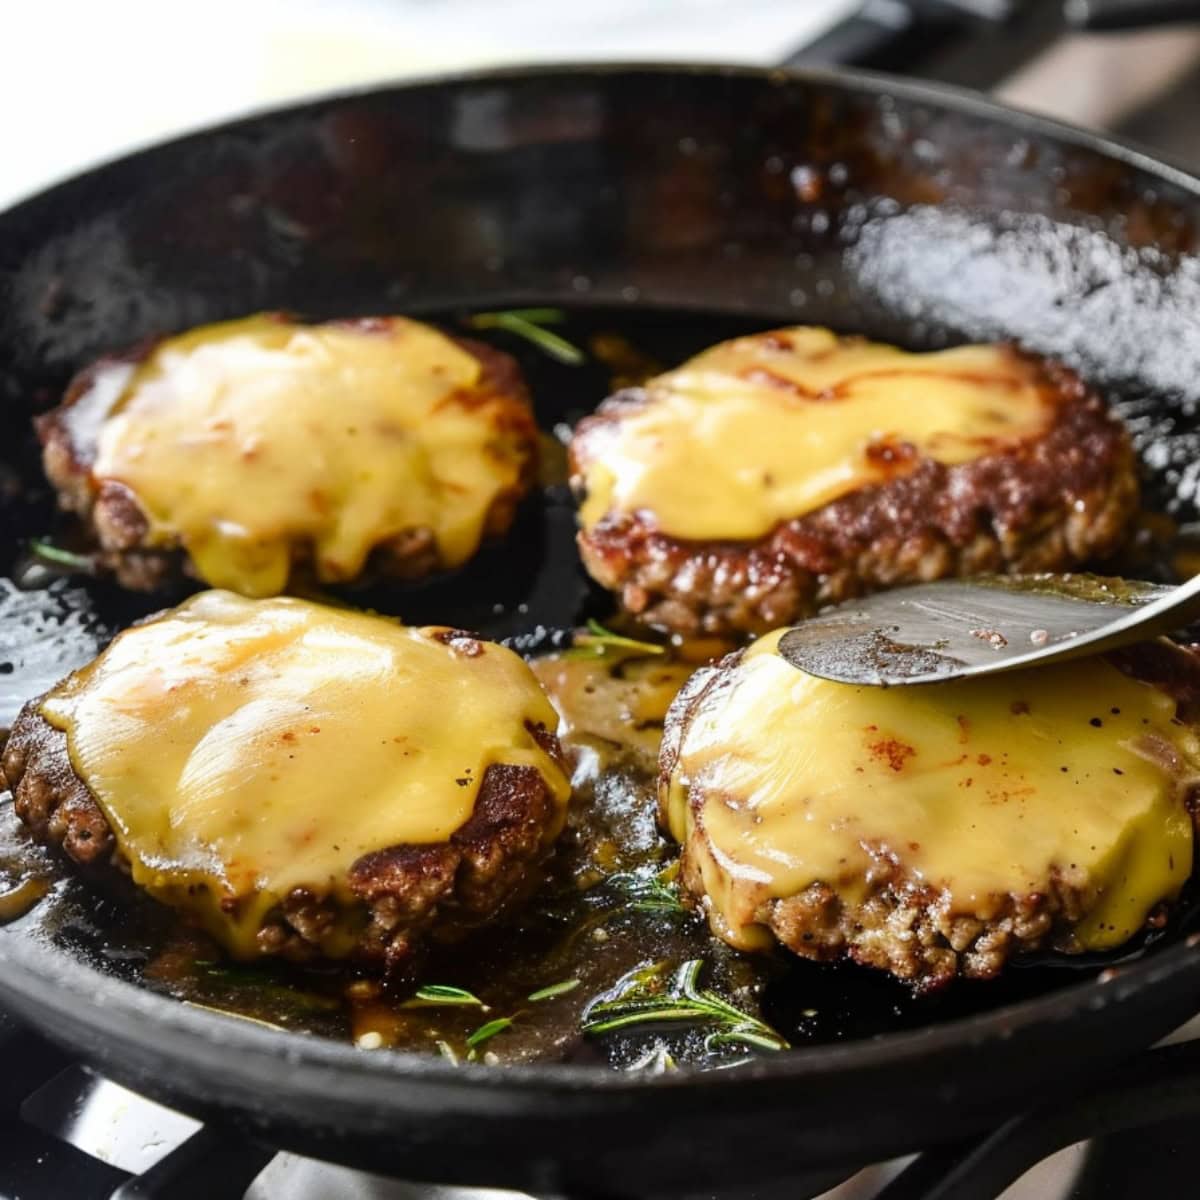 Patties topped with cheese on a skillet.